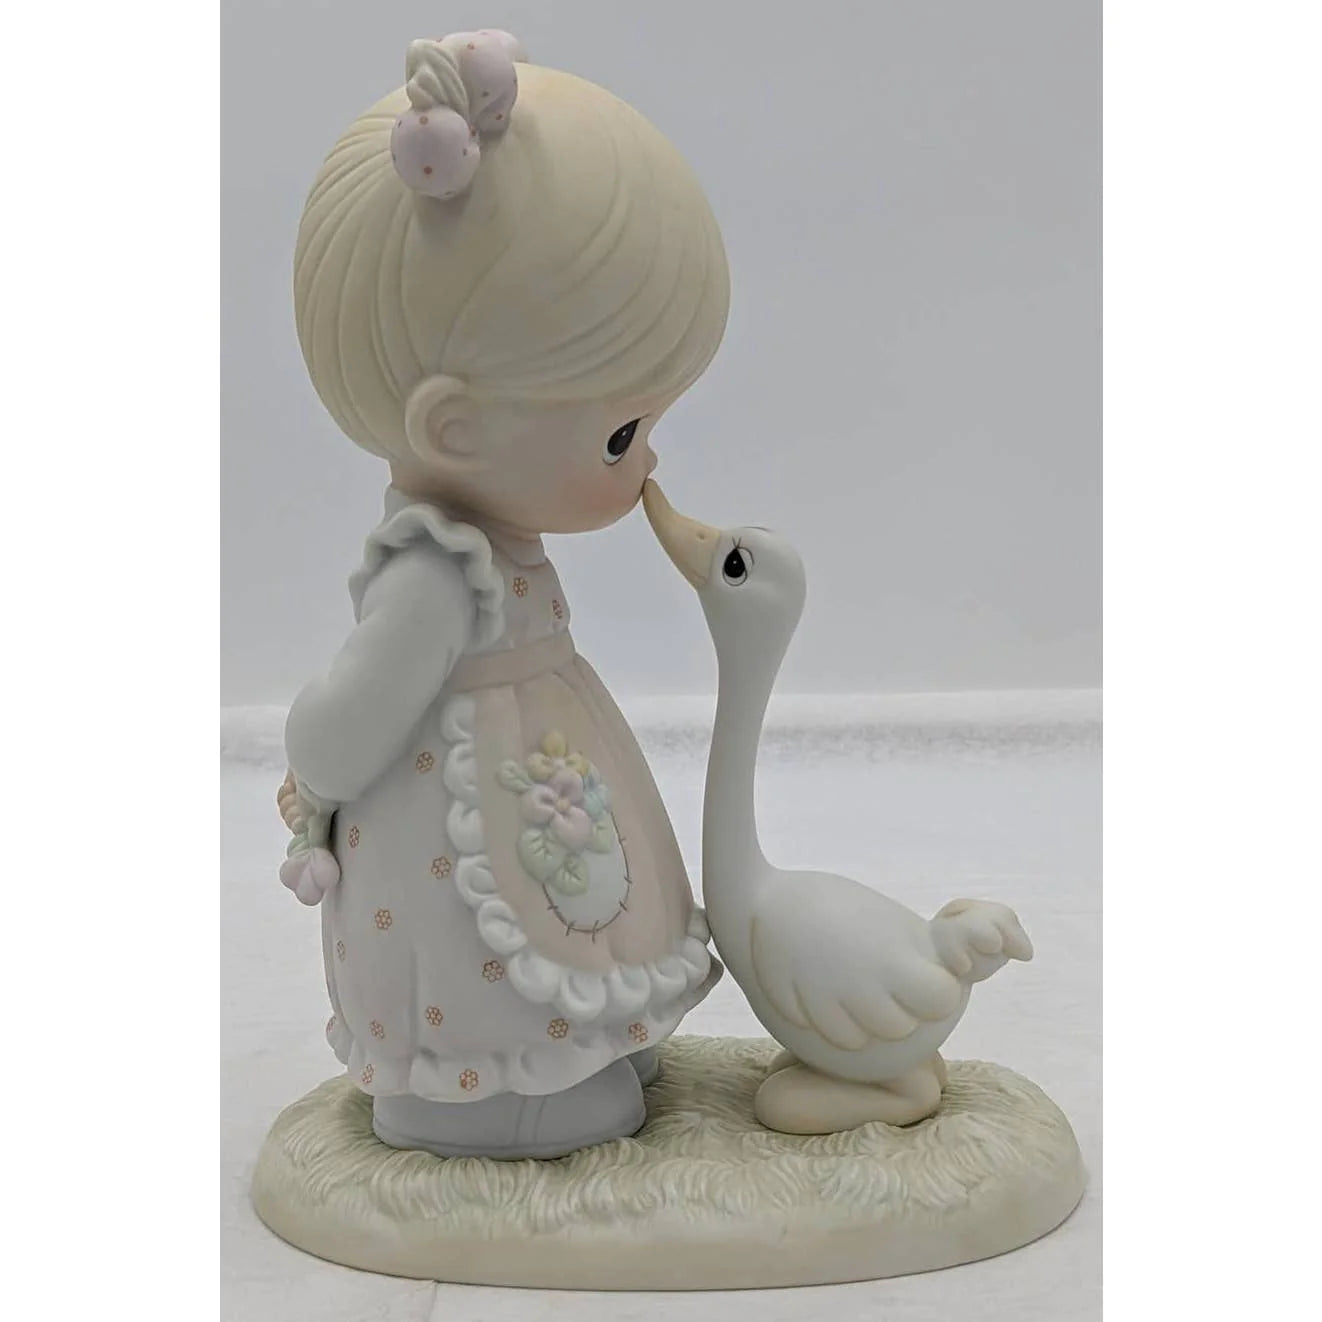 Some of The Most Valuable Enesco Precious Moments Collectibles of All Time